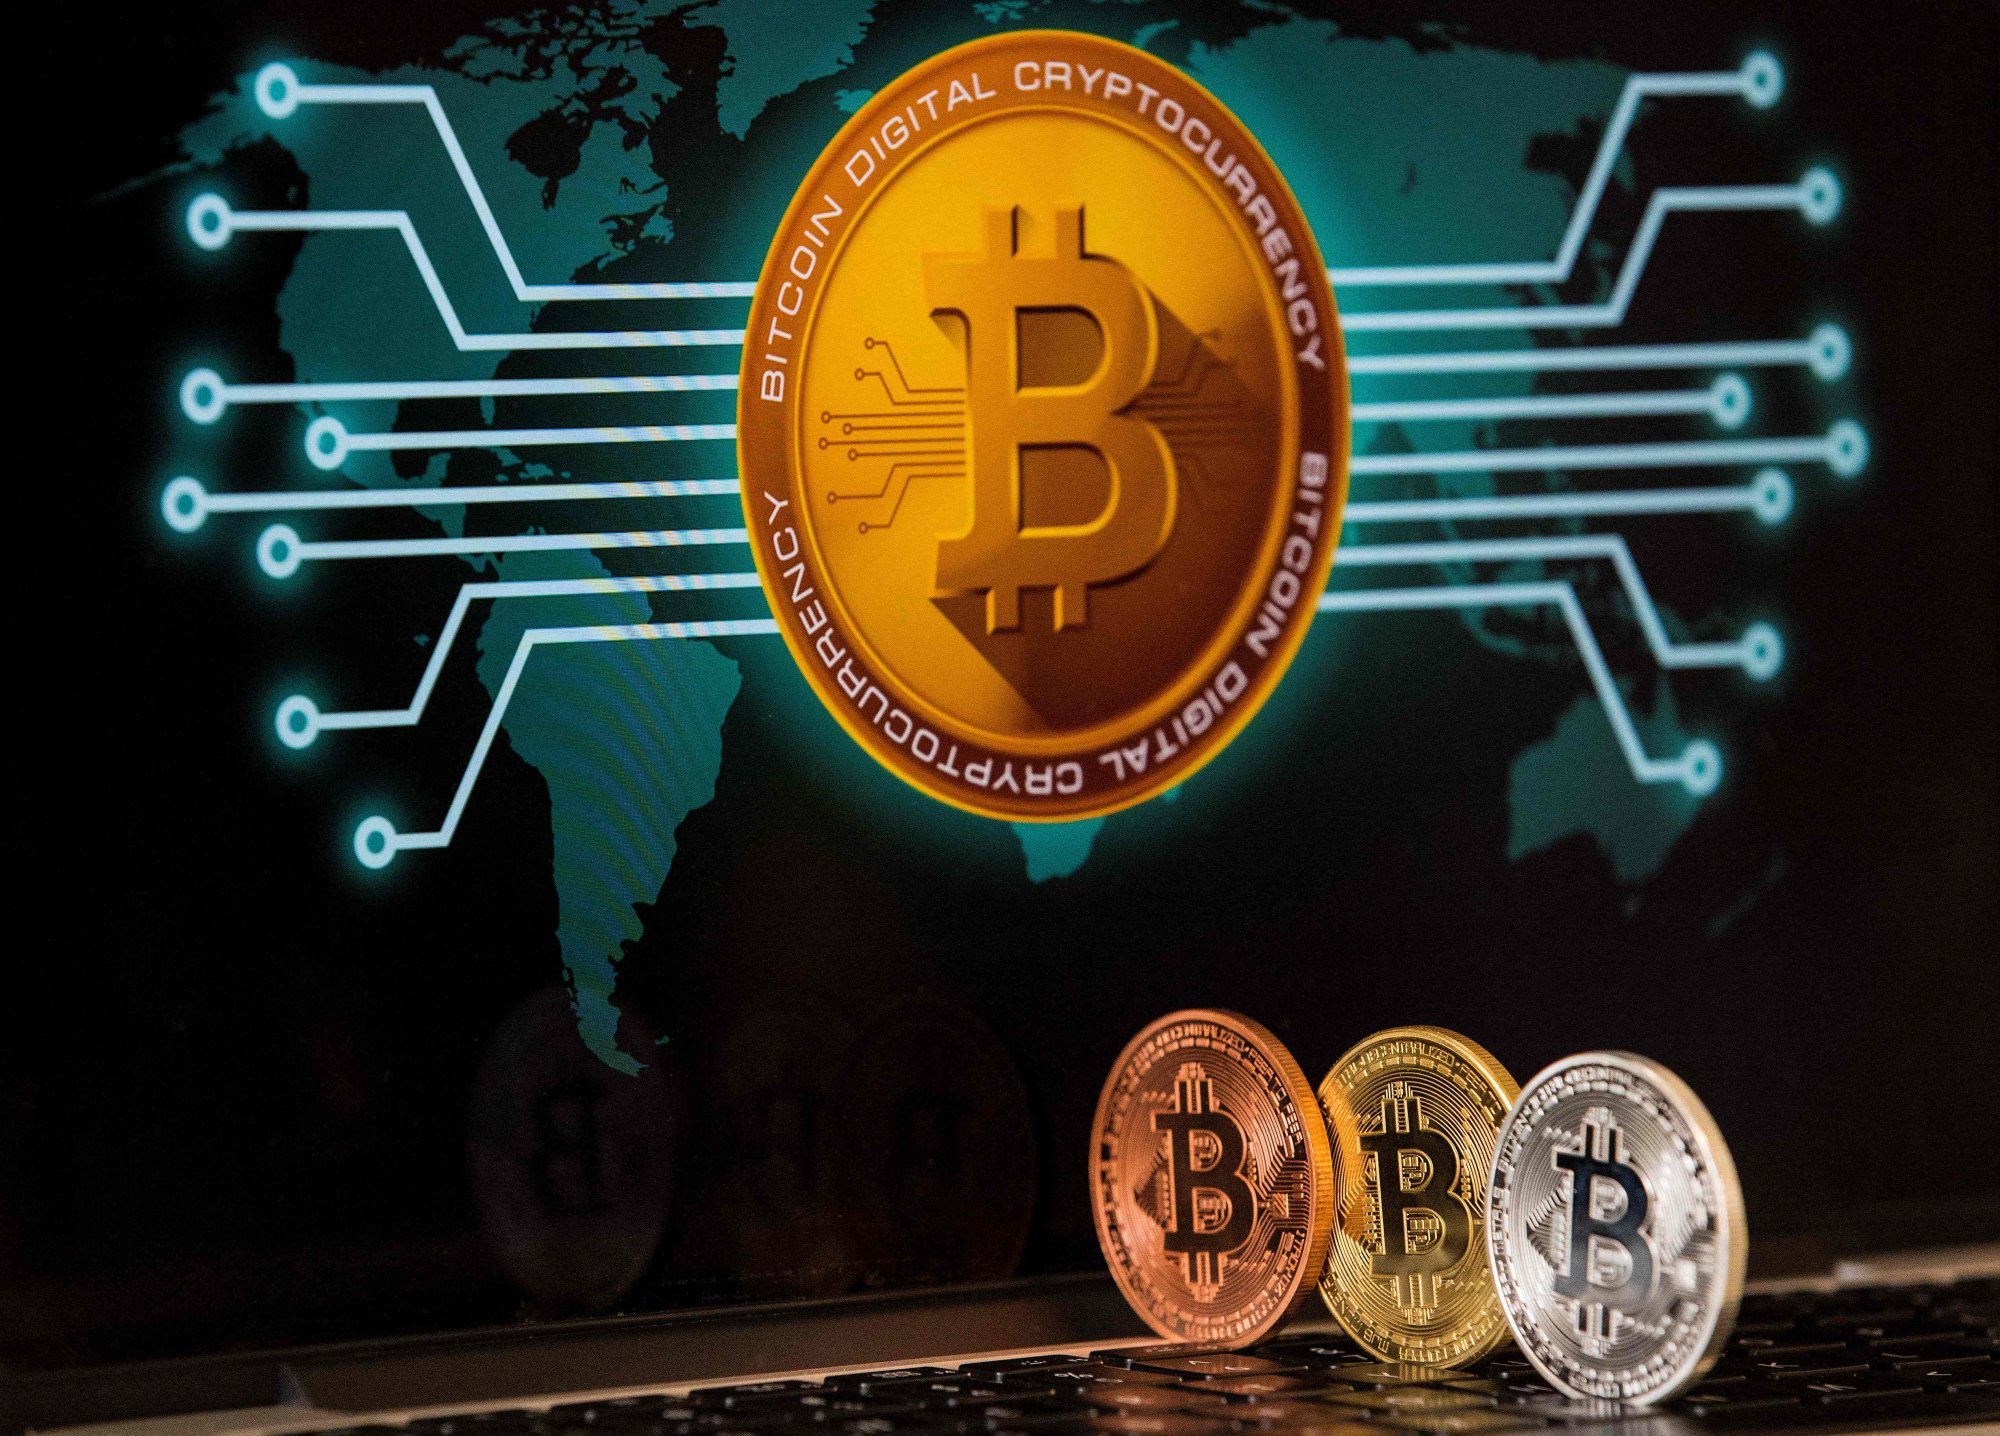 Due to the rising acceptance of cryptocurrencies such as bitcoin in recent years, crypto mining has become a popular way for many people to make money. Photo: AFP